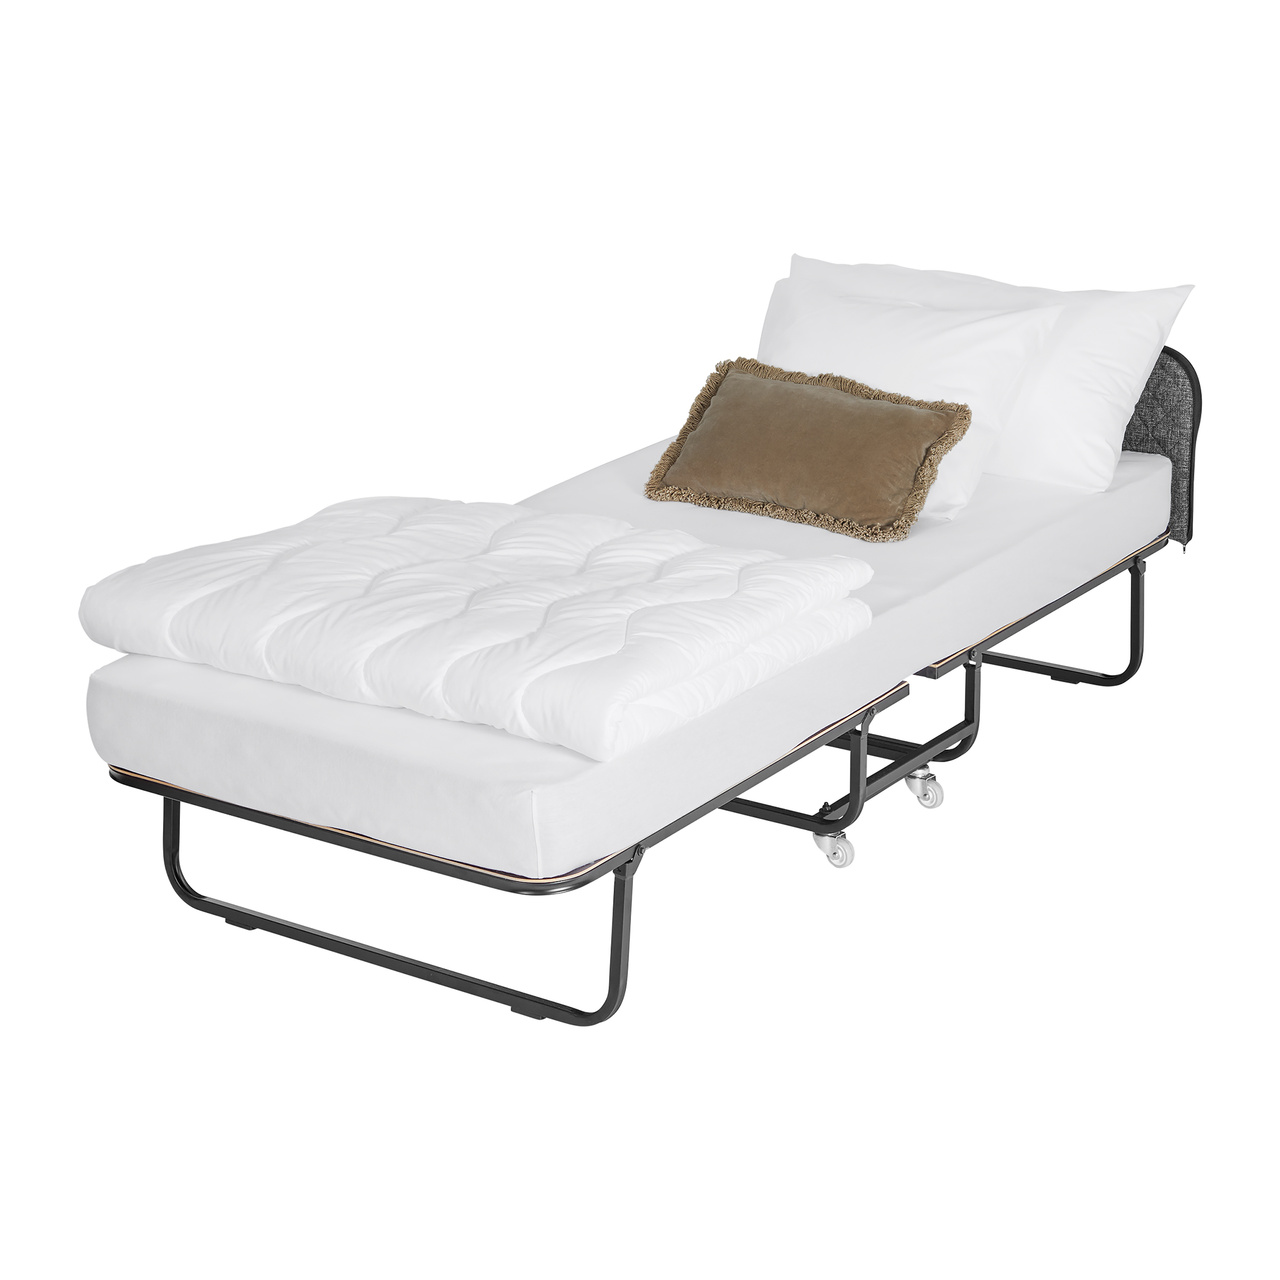 Ritz Easy - extra firm, with space for bed linens